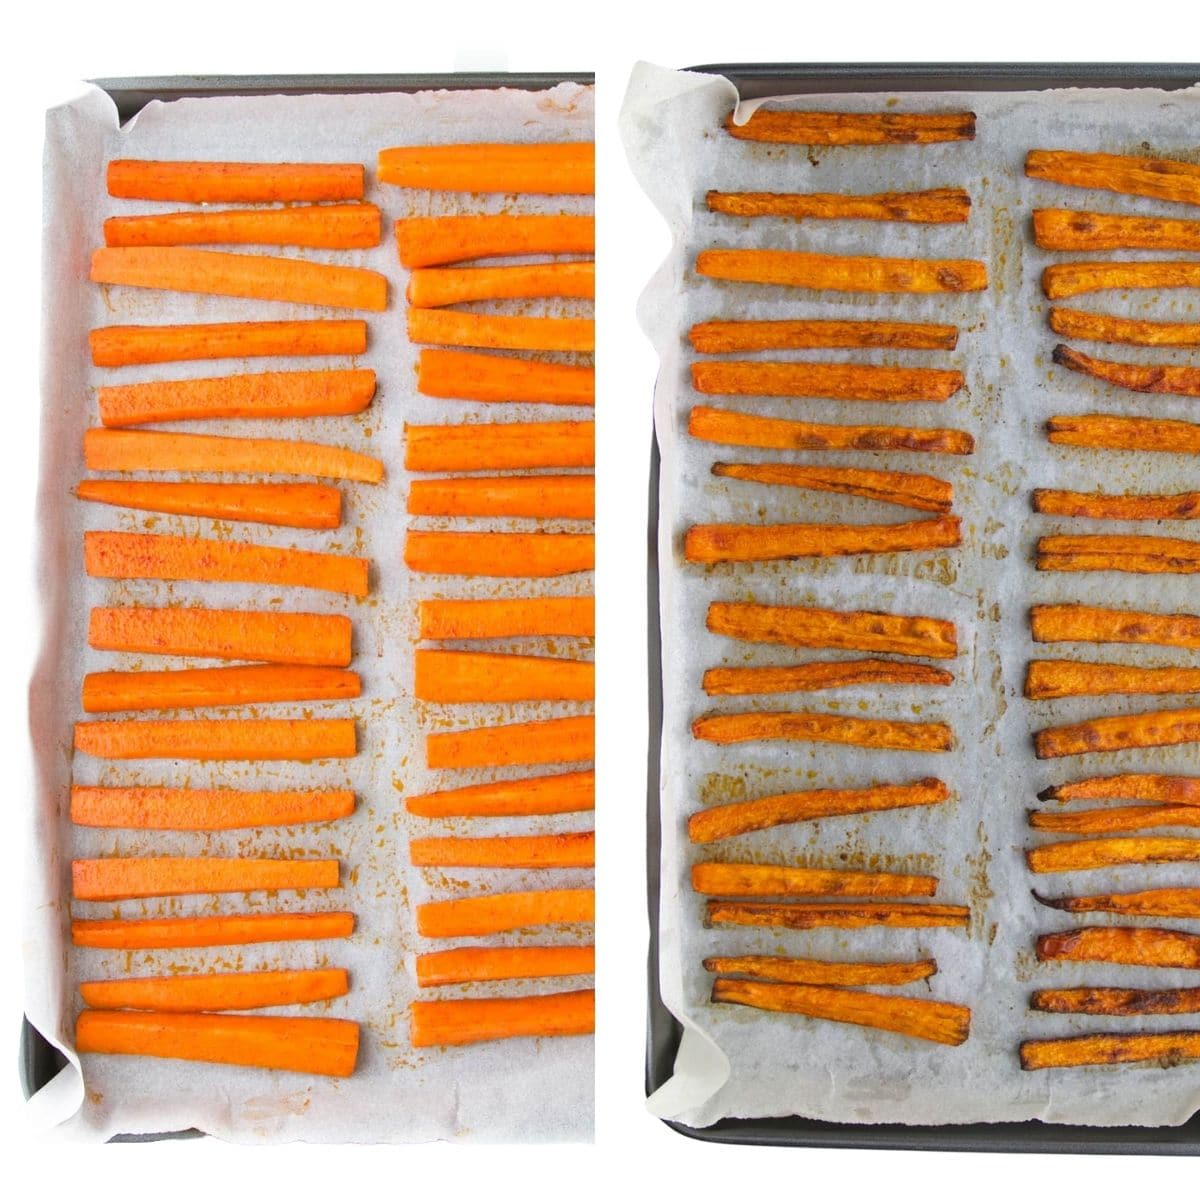 Carrot Fries on Sheet Pan Before and After Cooking